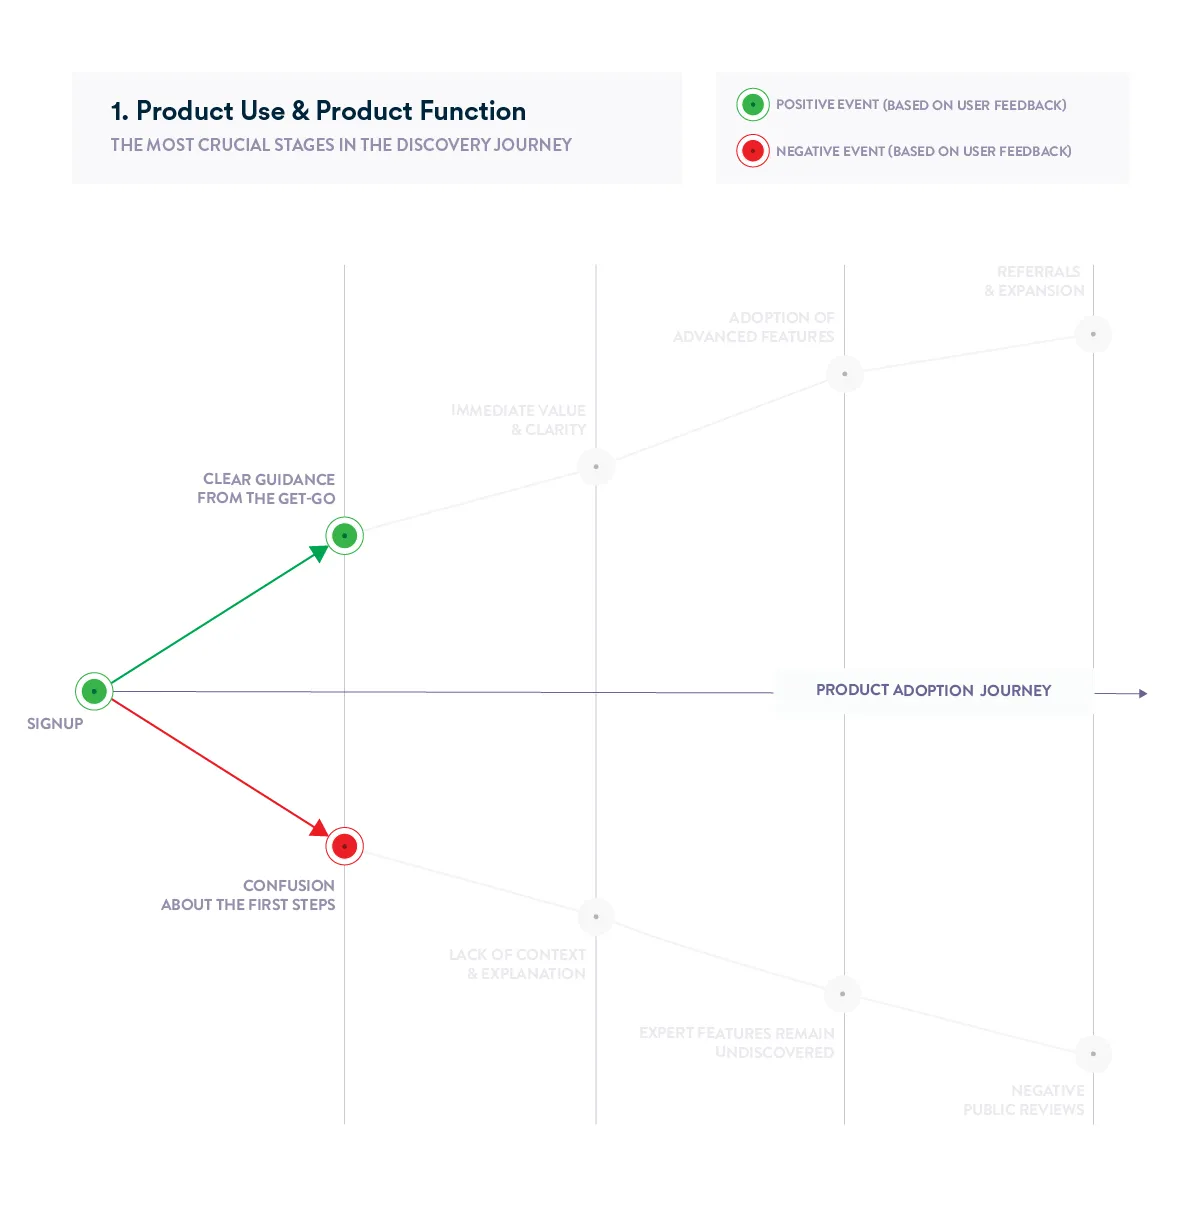 Product Adoption Journey Chart - Product Use and Product Function